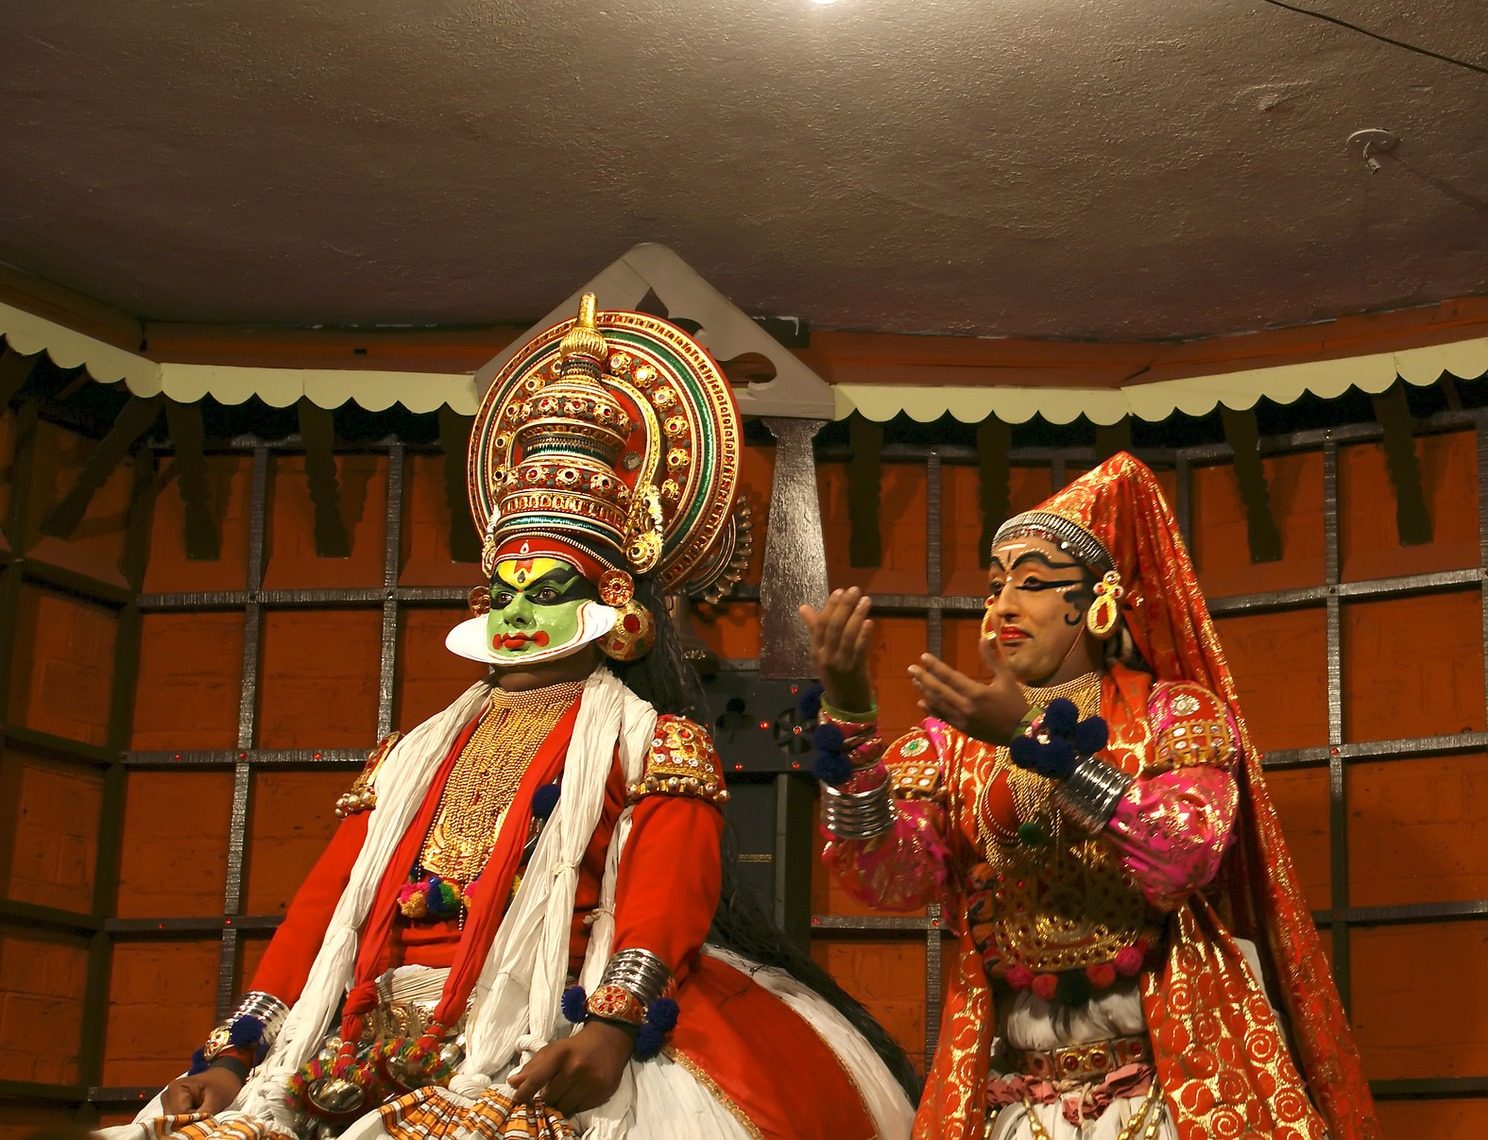 FORT COCHIN - MARCH 06: Kathakali performer in the virtuous pachcha (green) role in Cochin Kathakali Center on March 06, 2011 in South India. Kathakali is the ancient classical dance form of Kerala.